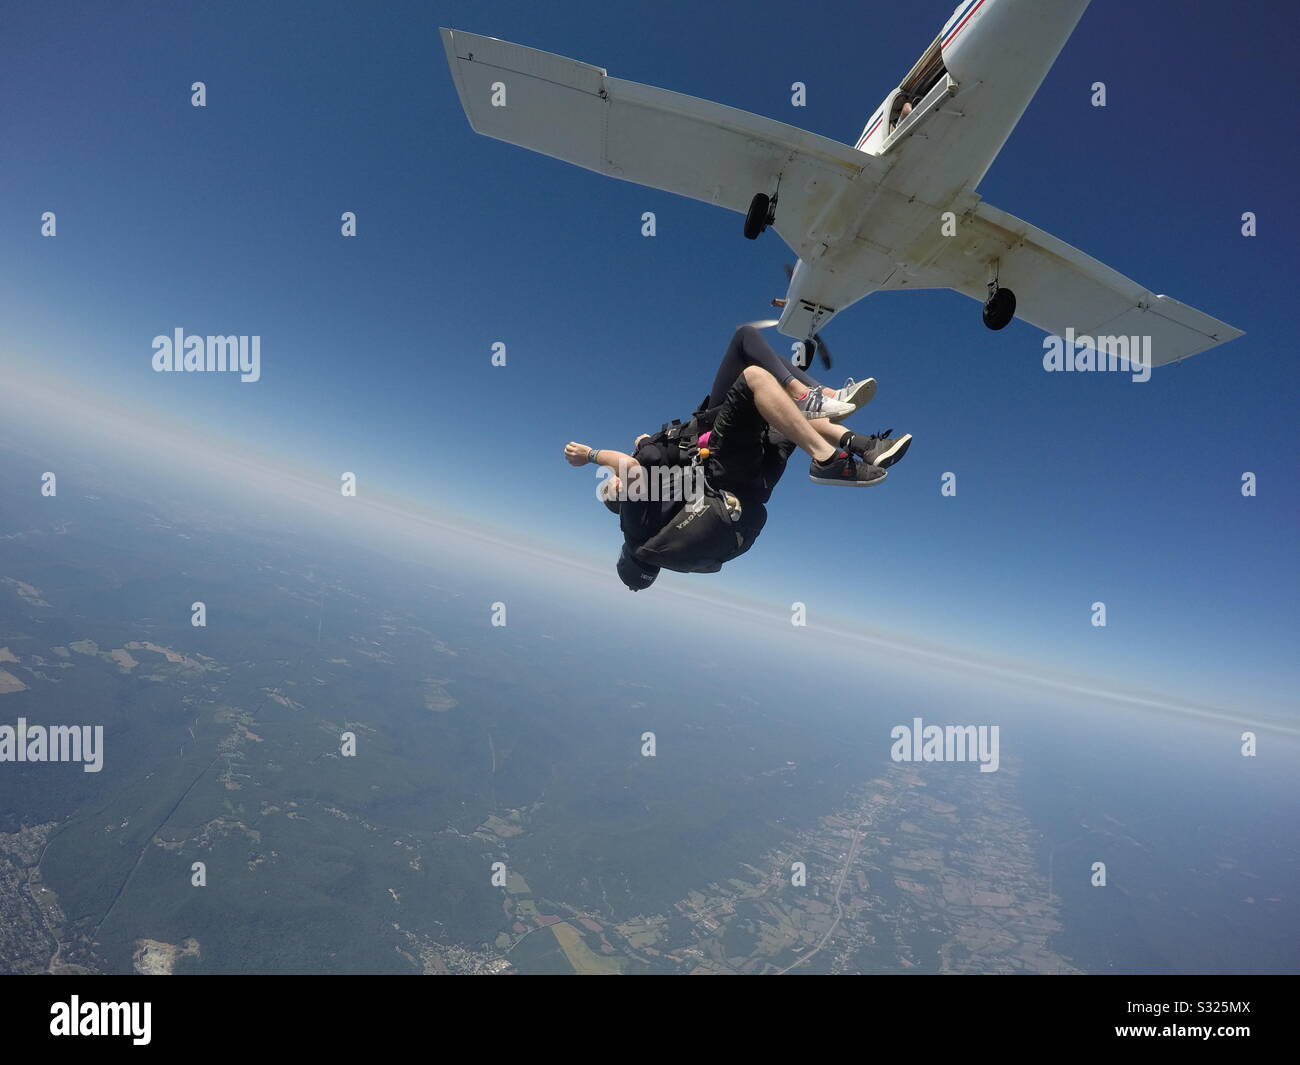 Skydiving Stock Photo